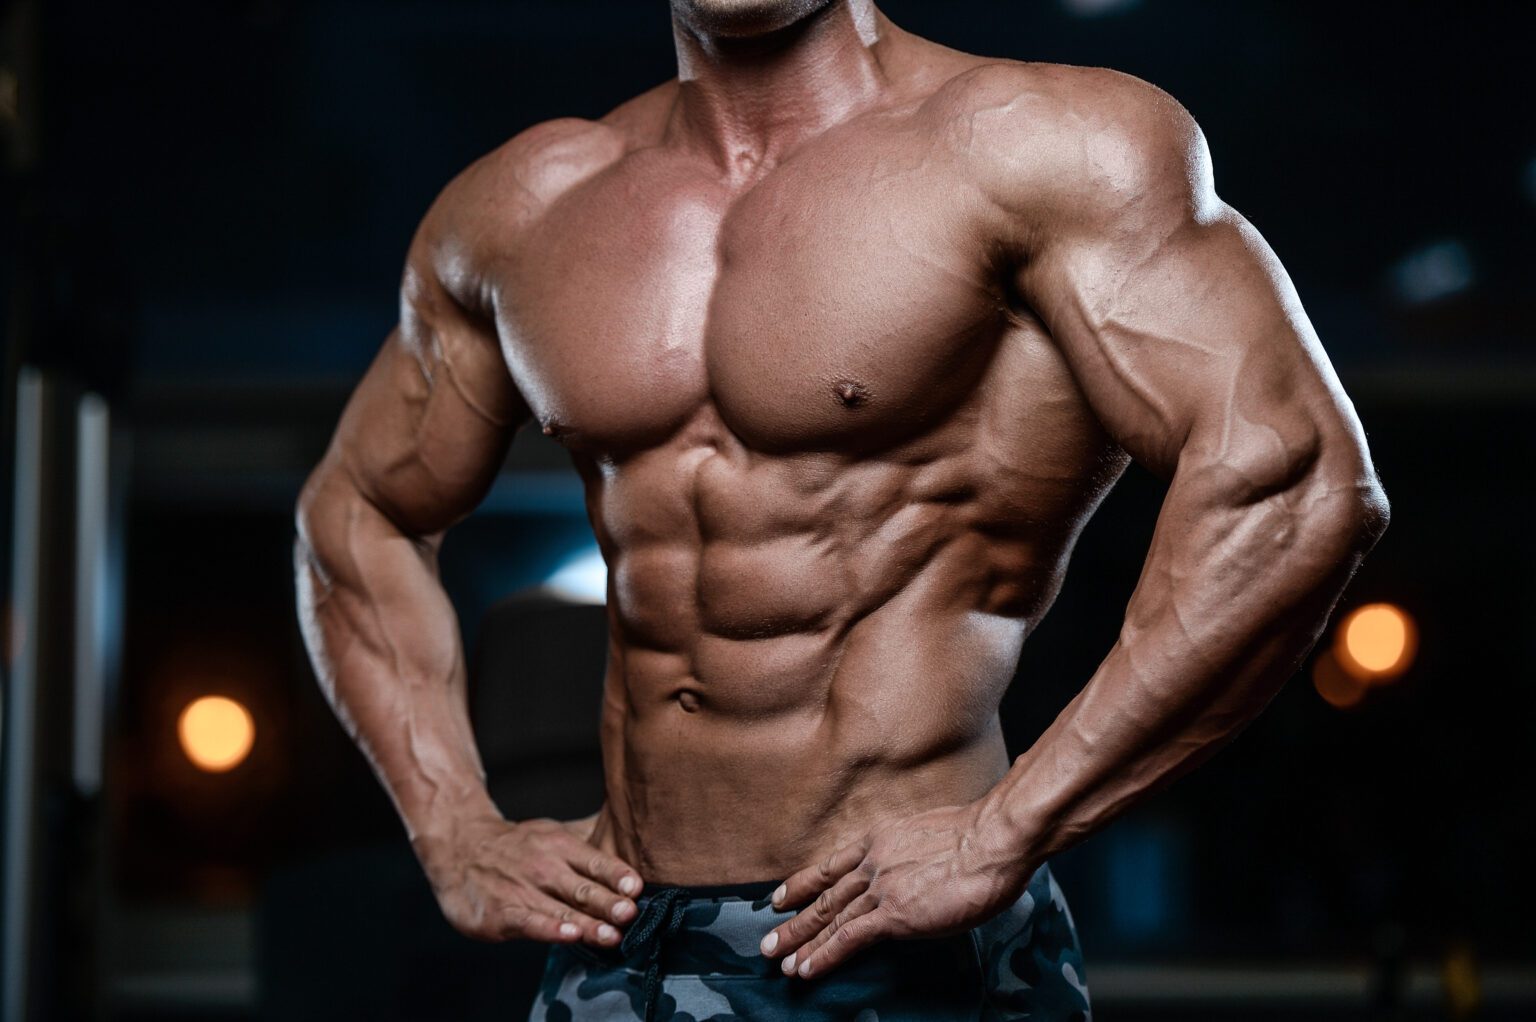 Secondary Chest Muscles - How the Top 2 Determine a Workout